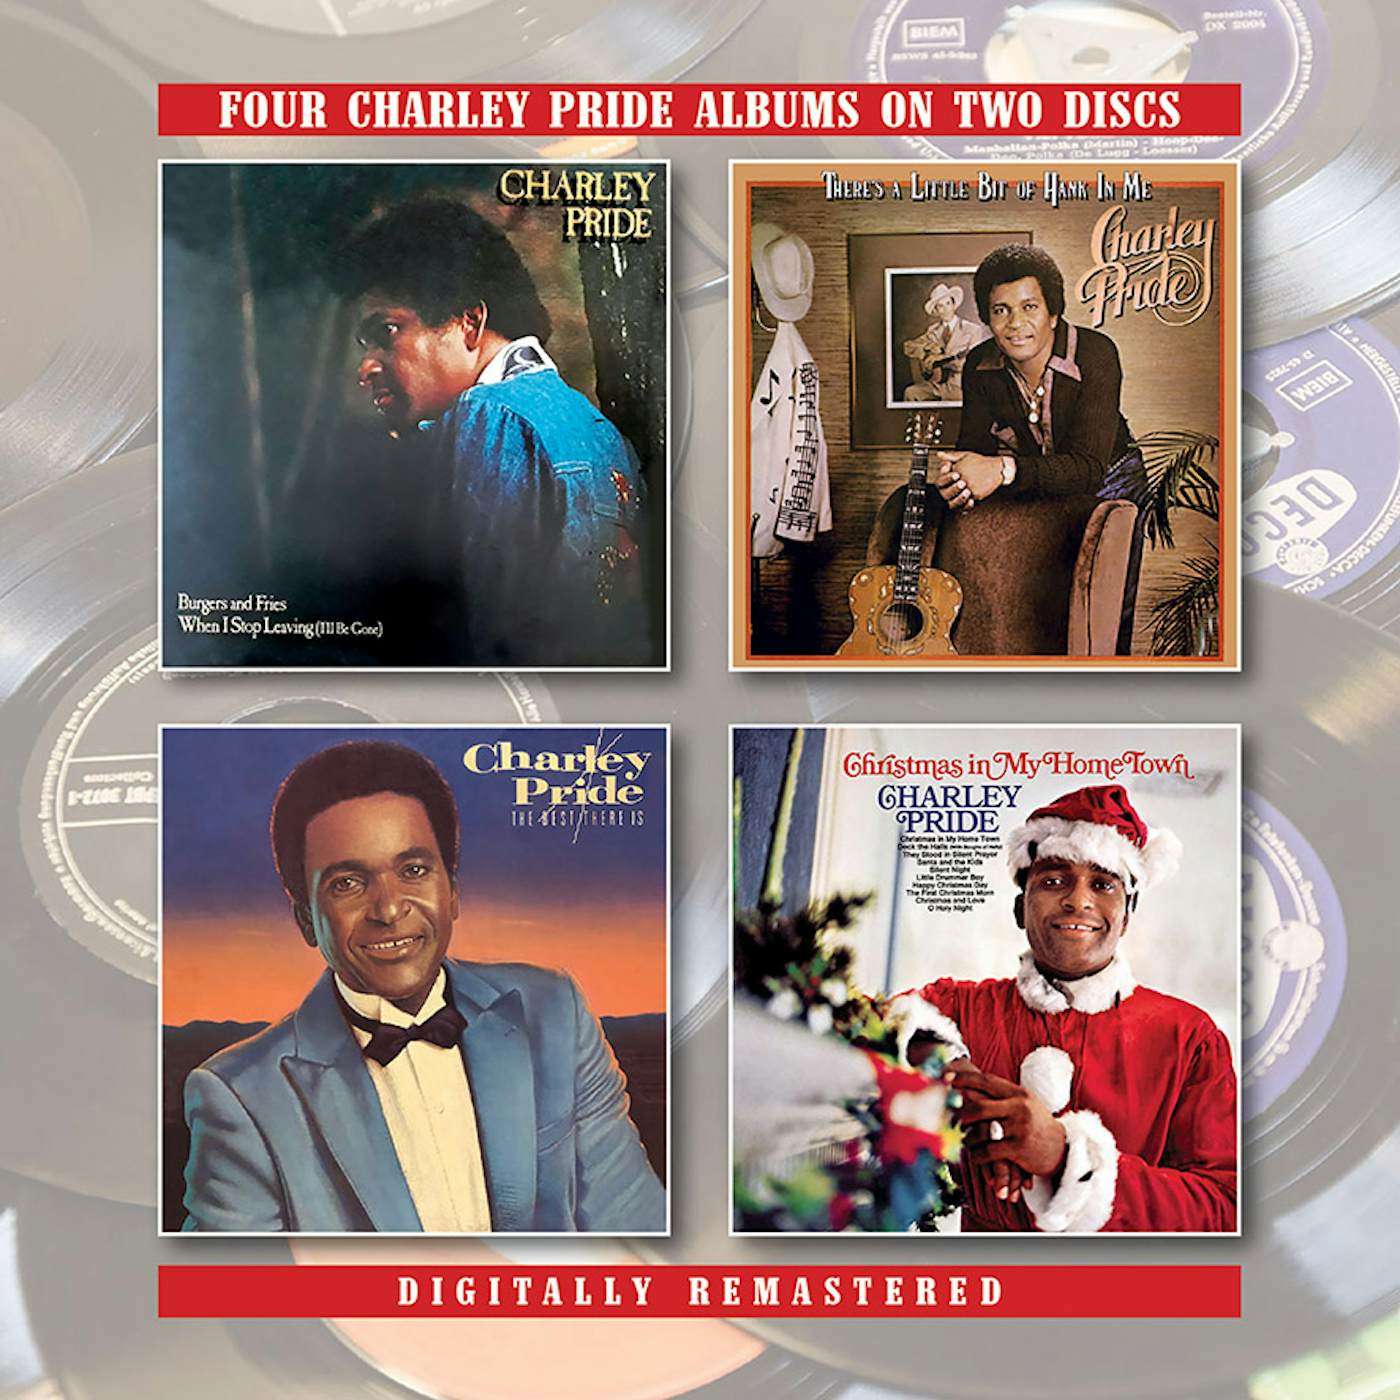 Charley Pride BURGERS & FRIES / WHEN I STOP LEAVING / THERE'S CD